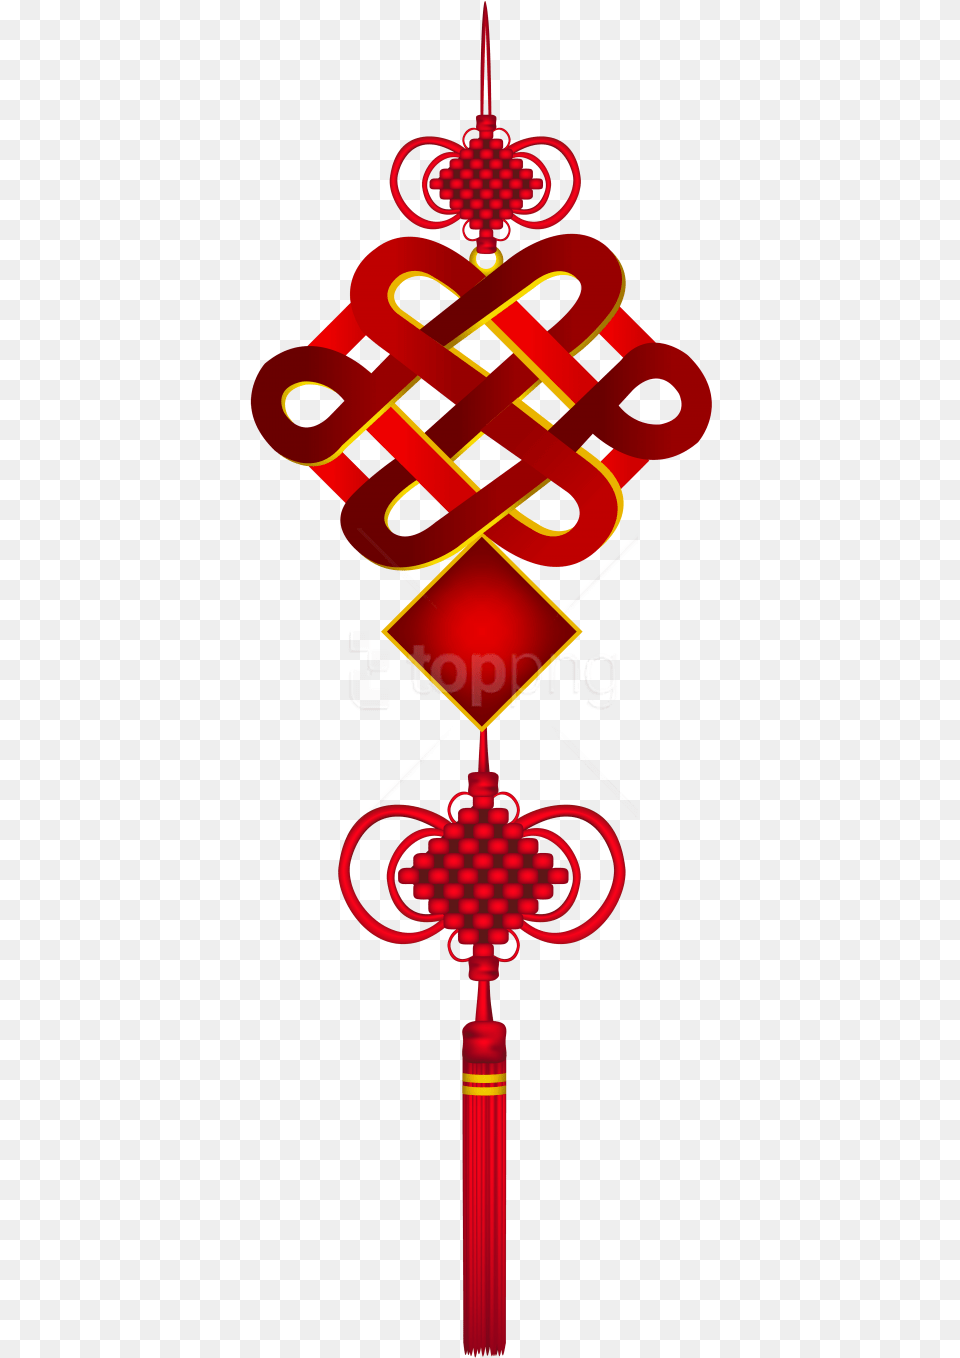 Hanging Ornament Clipart Chinese Vector Ornament, Light, Dynamite, Weapon, Traffic Light Png Image